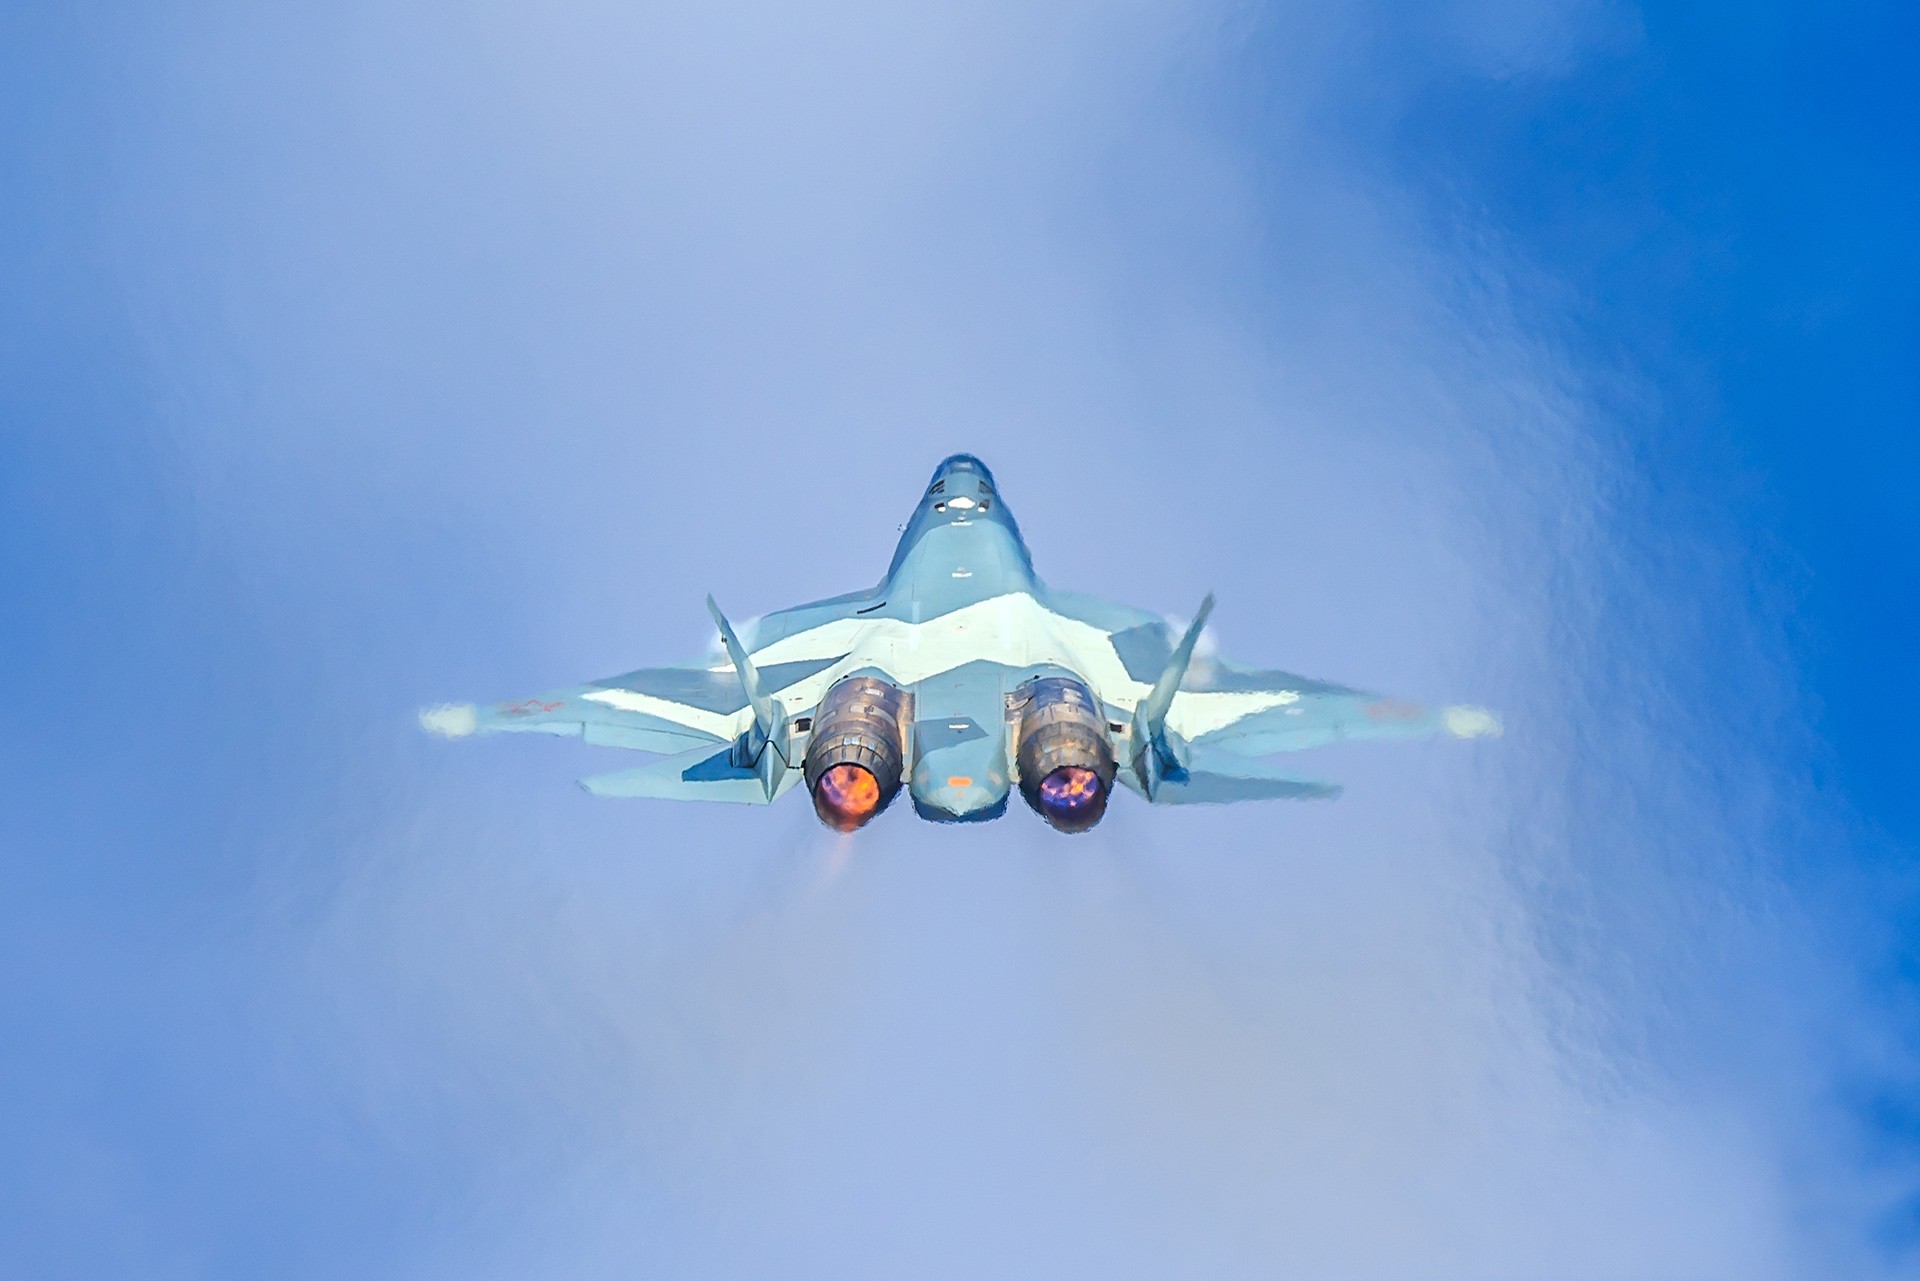 General 1920x1281 military aircraft vehicle afterburner military Sukhoi Su-57 jet fighter aircraft military vehicle Russian/Soviet aircraft Sukhoi